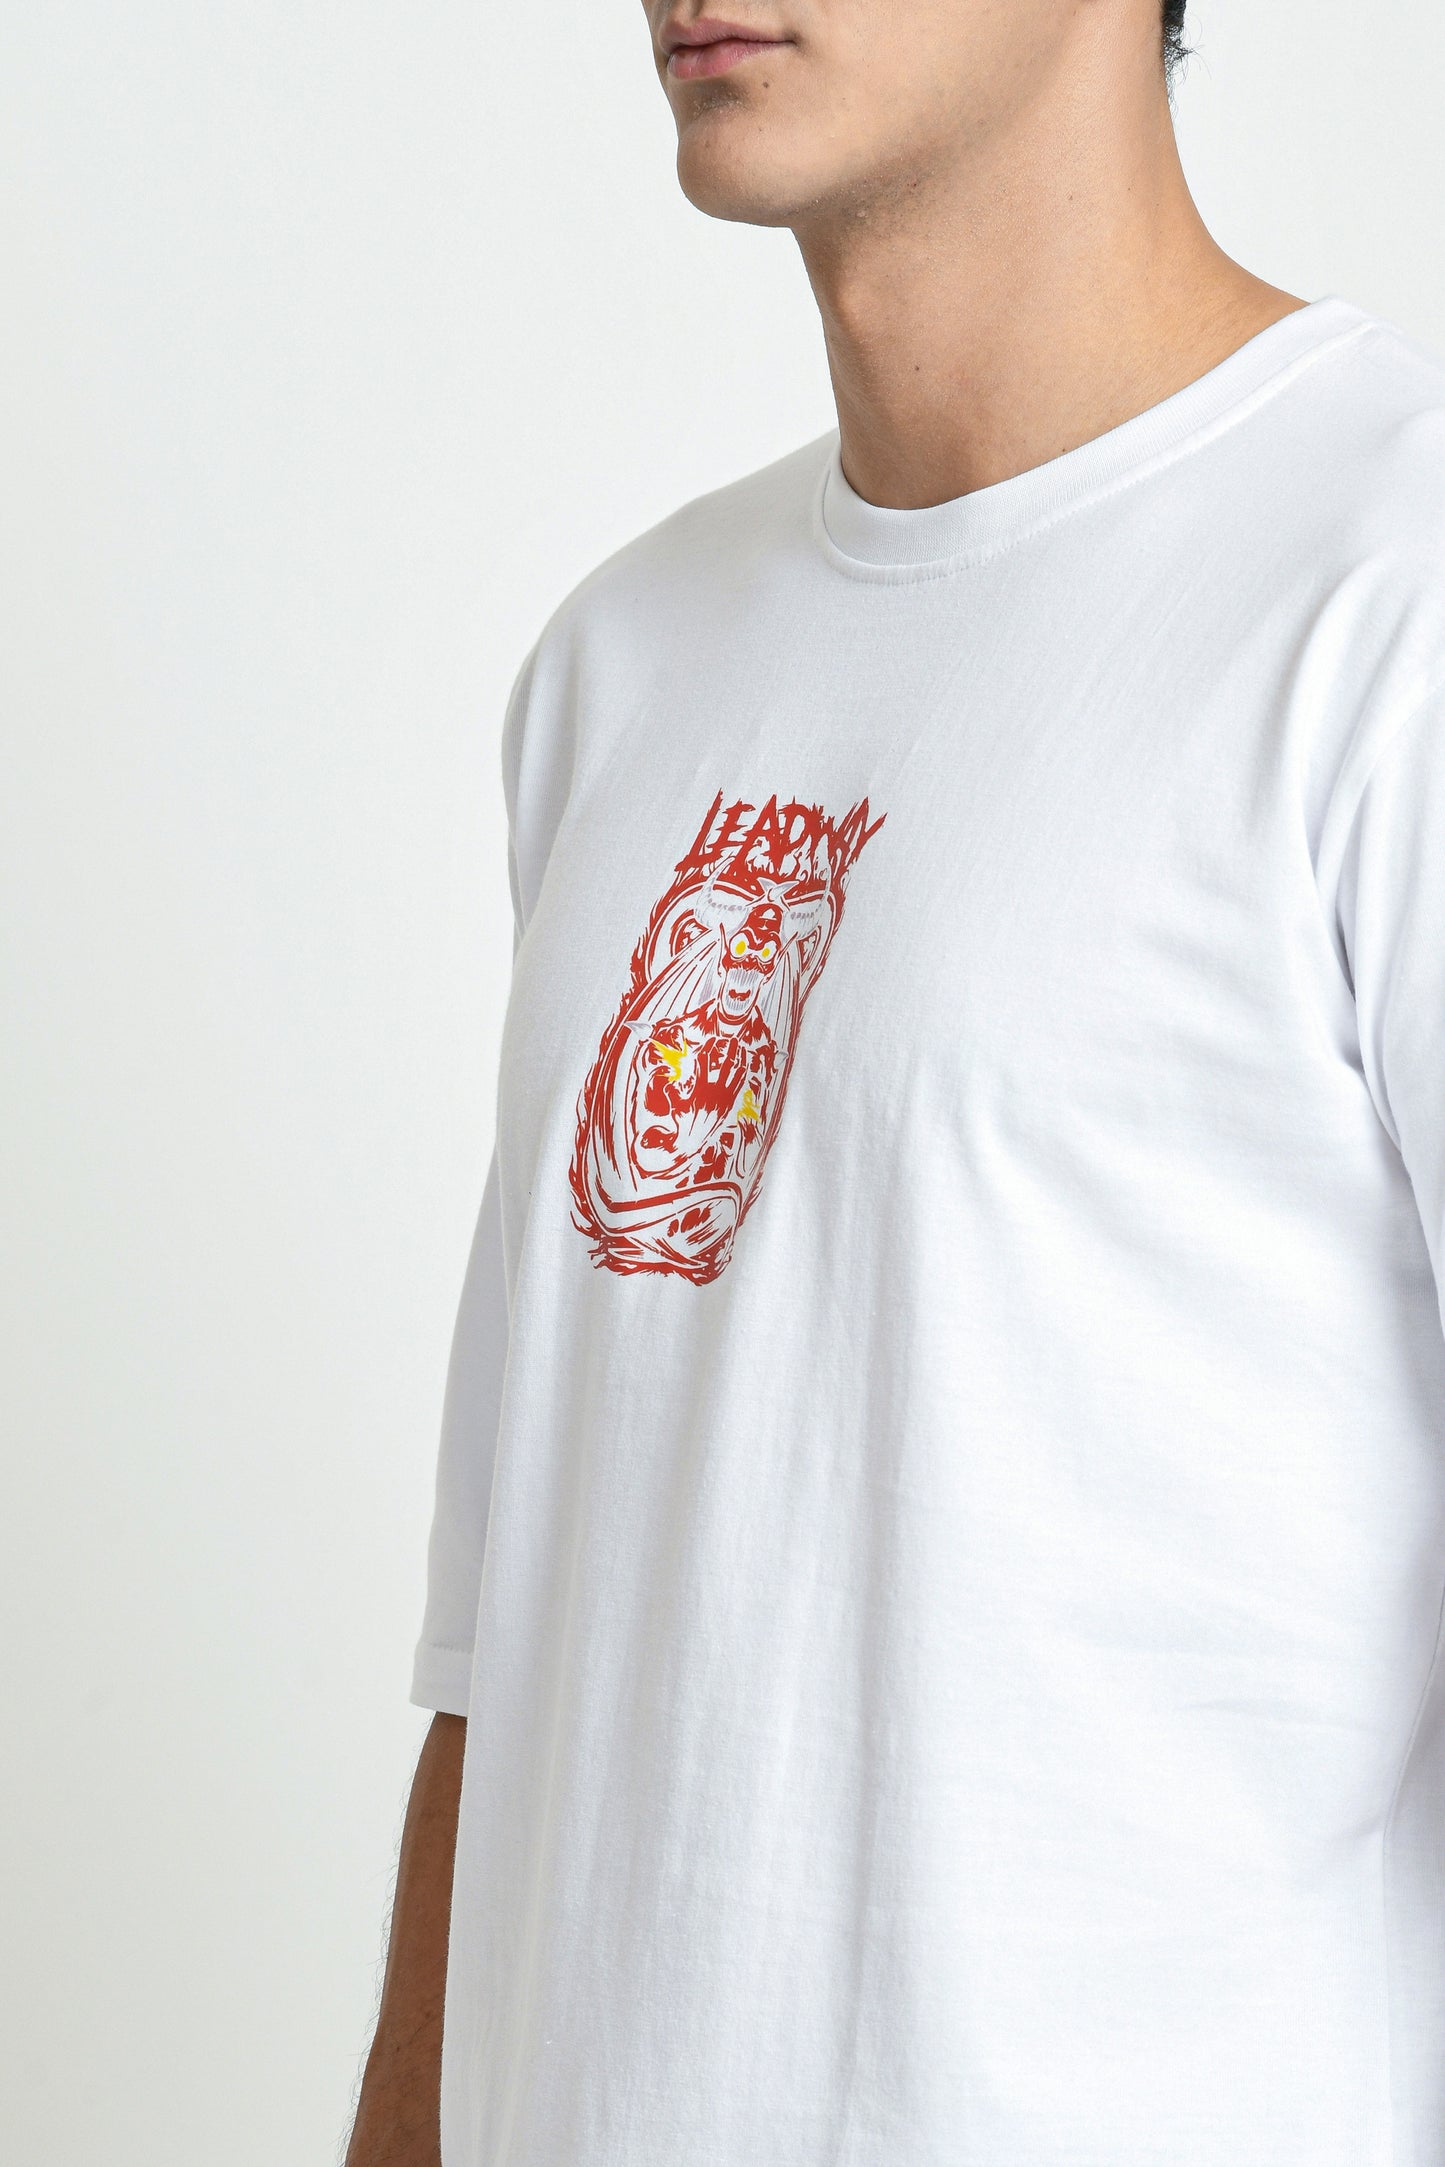 LEAD-WAY PRINTED OVERSIZED T-SHIRT